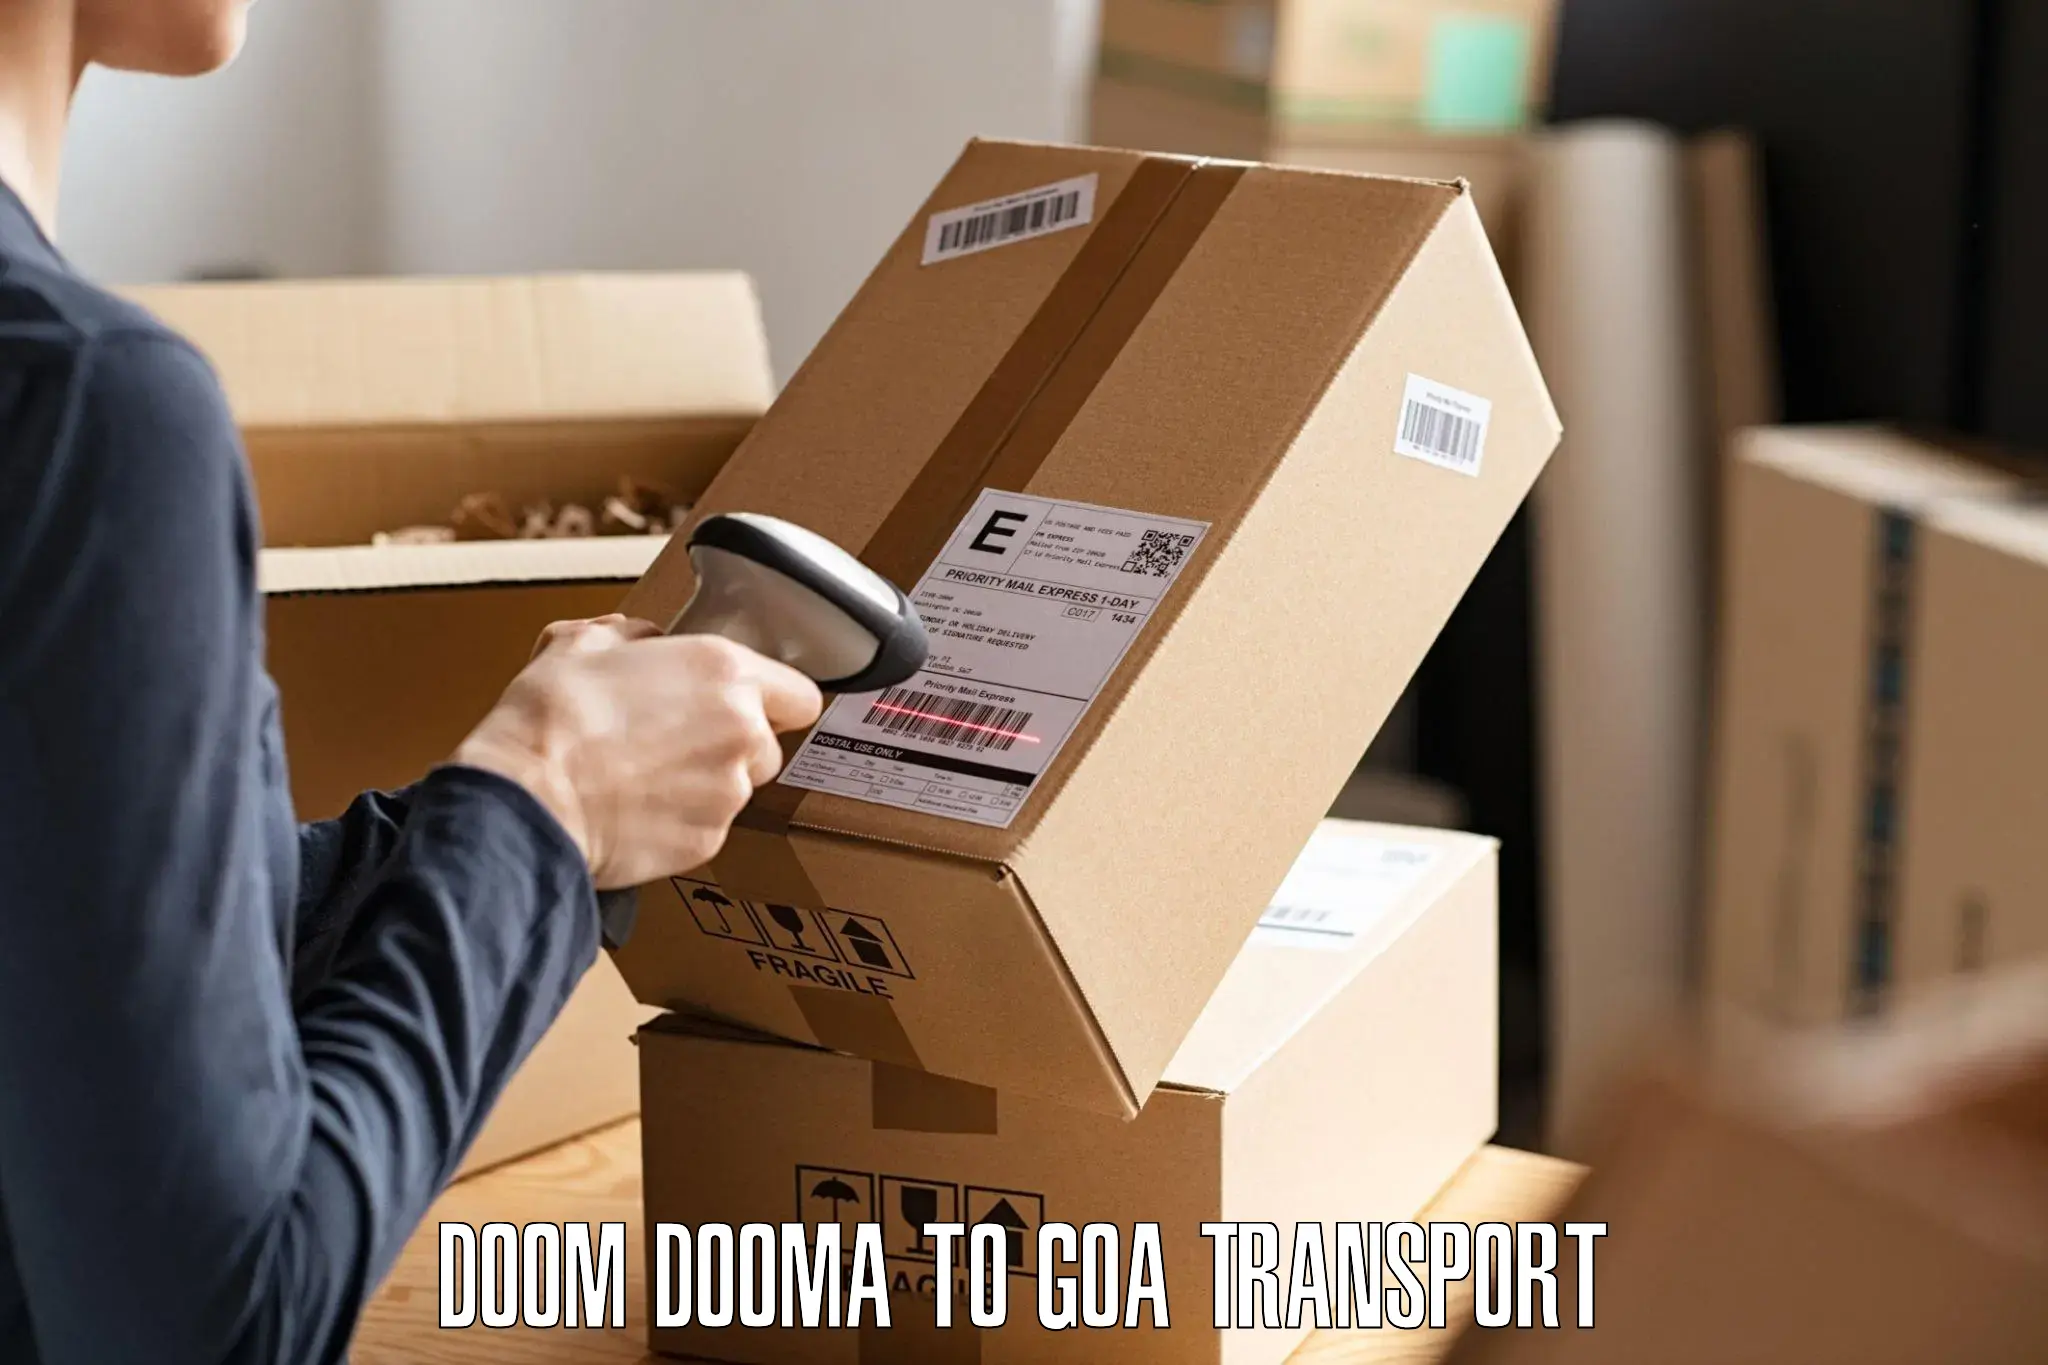 Transport bike from one state to another in Doom Dooma to Goa